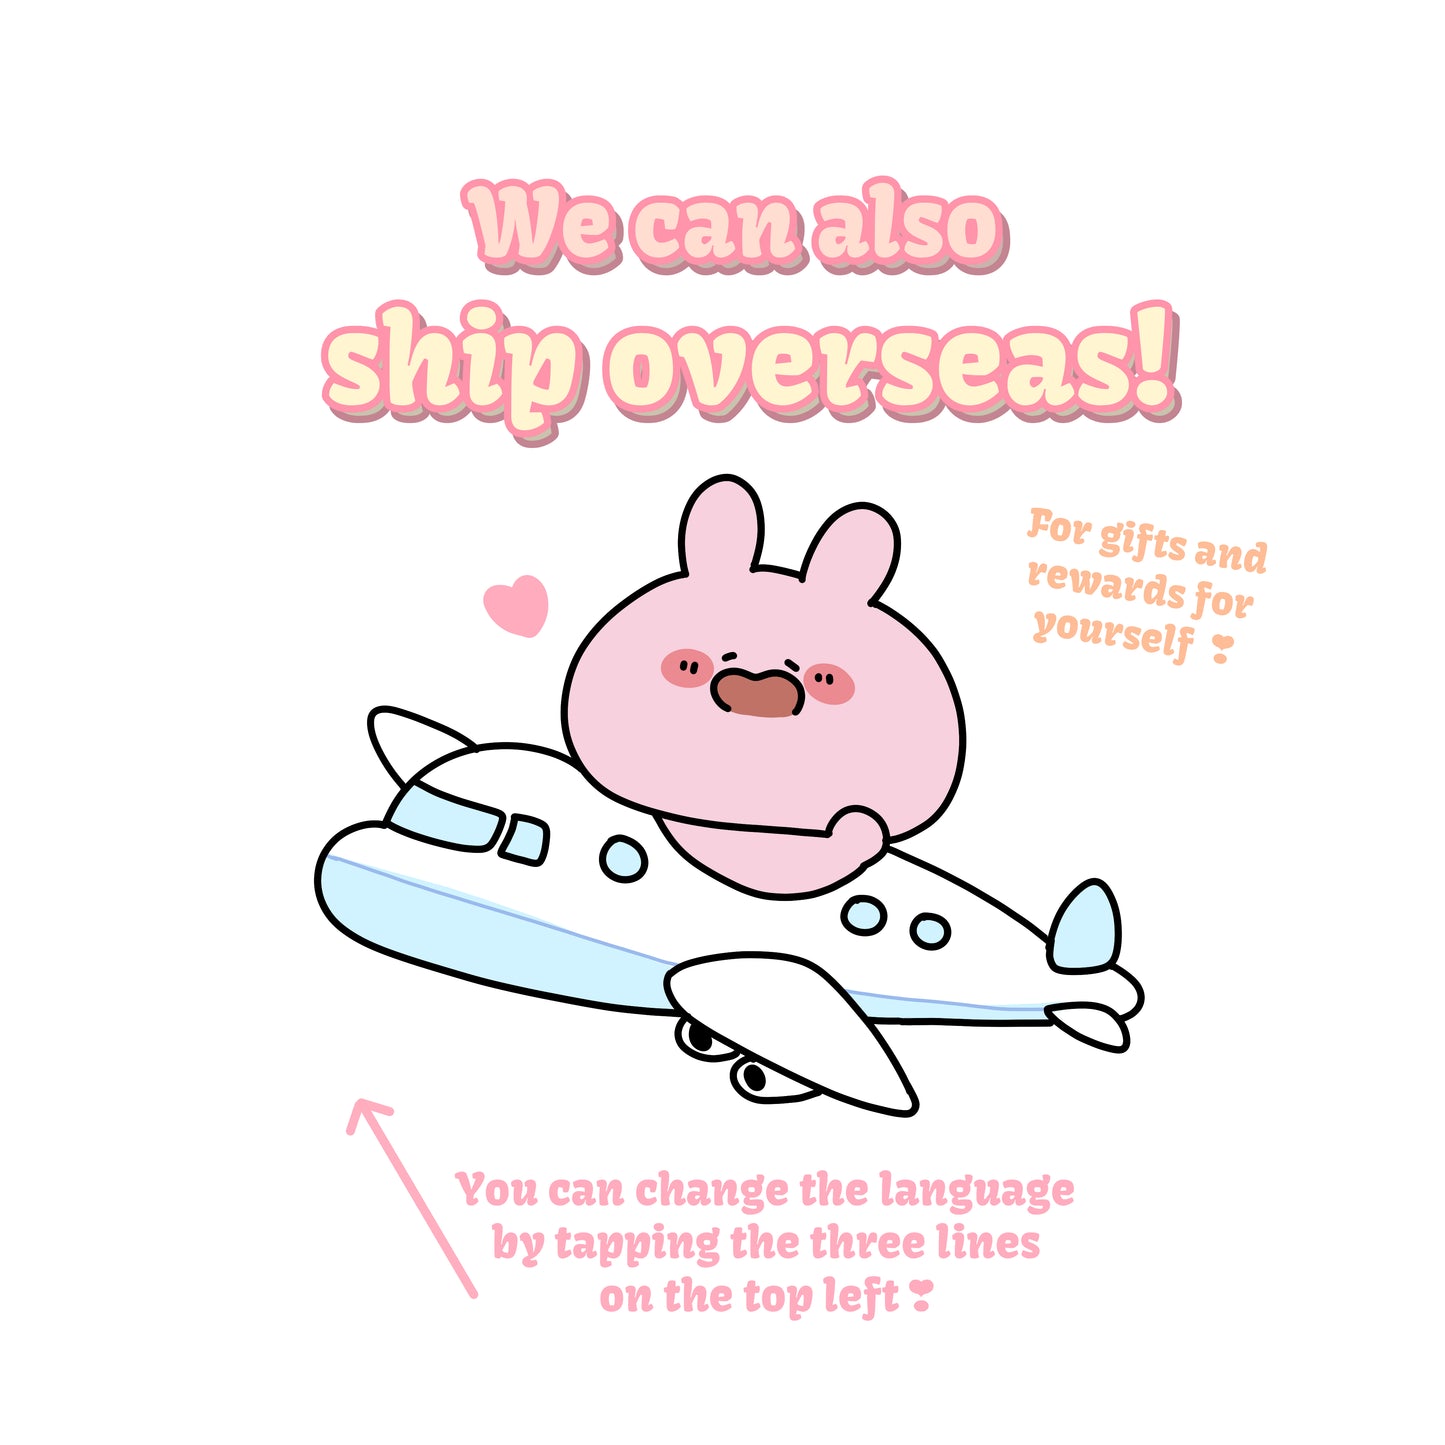 [Asamimi-chan] Random sticker complete set (6 types in total) (Asamimi-chan popular scene Yoseatsume series) [Shipped in mid-February]